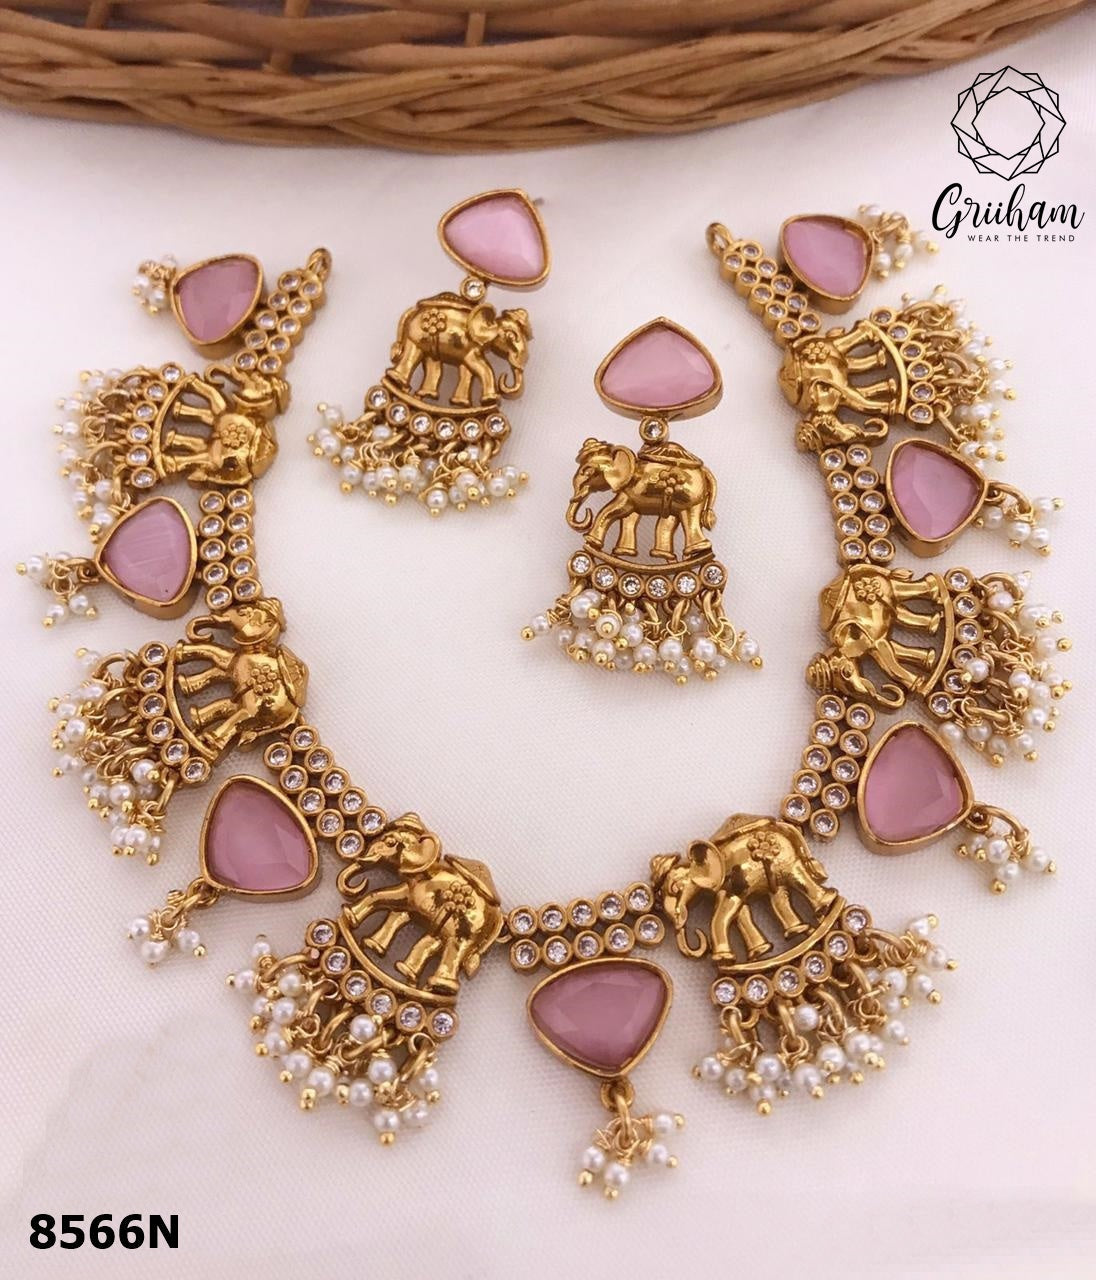 Premium Gold Plated Exclusive Necklace Set with diff Colours Monalisa Stones 8565N-Necklace Set-Griiham-Colour2-Griiham